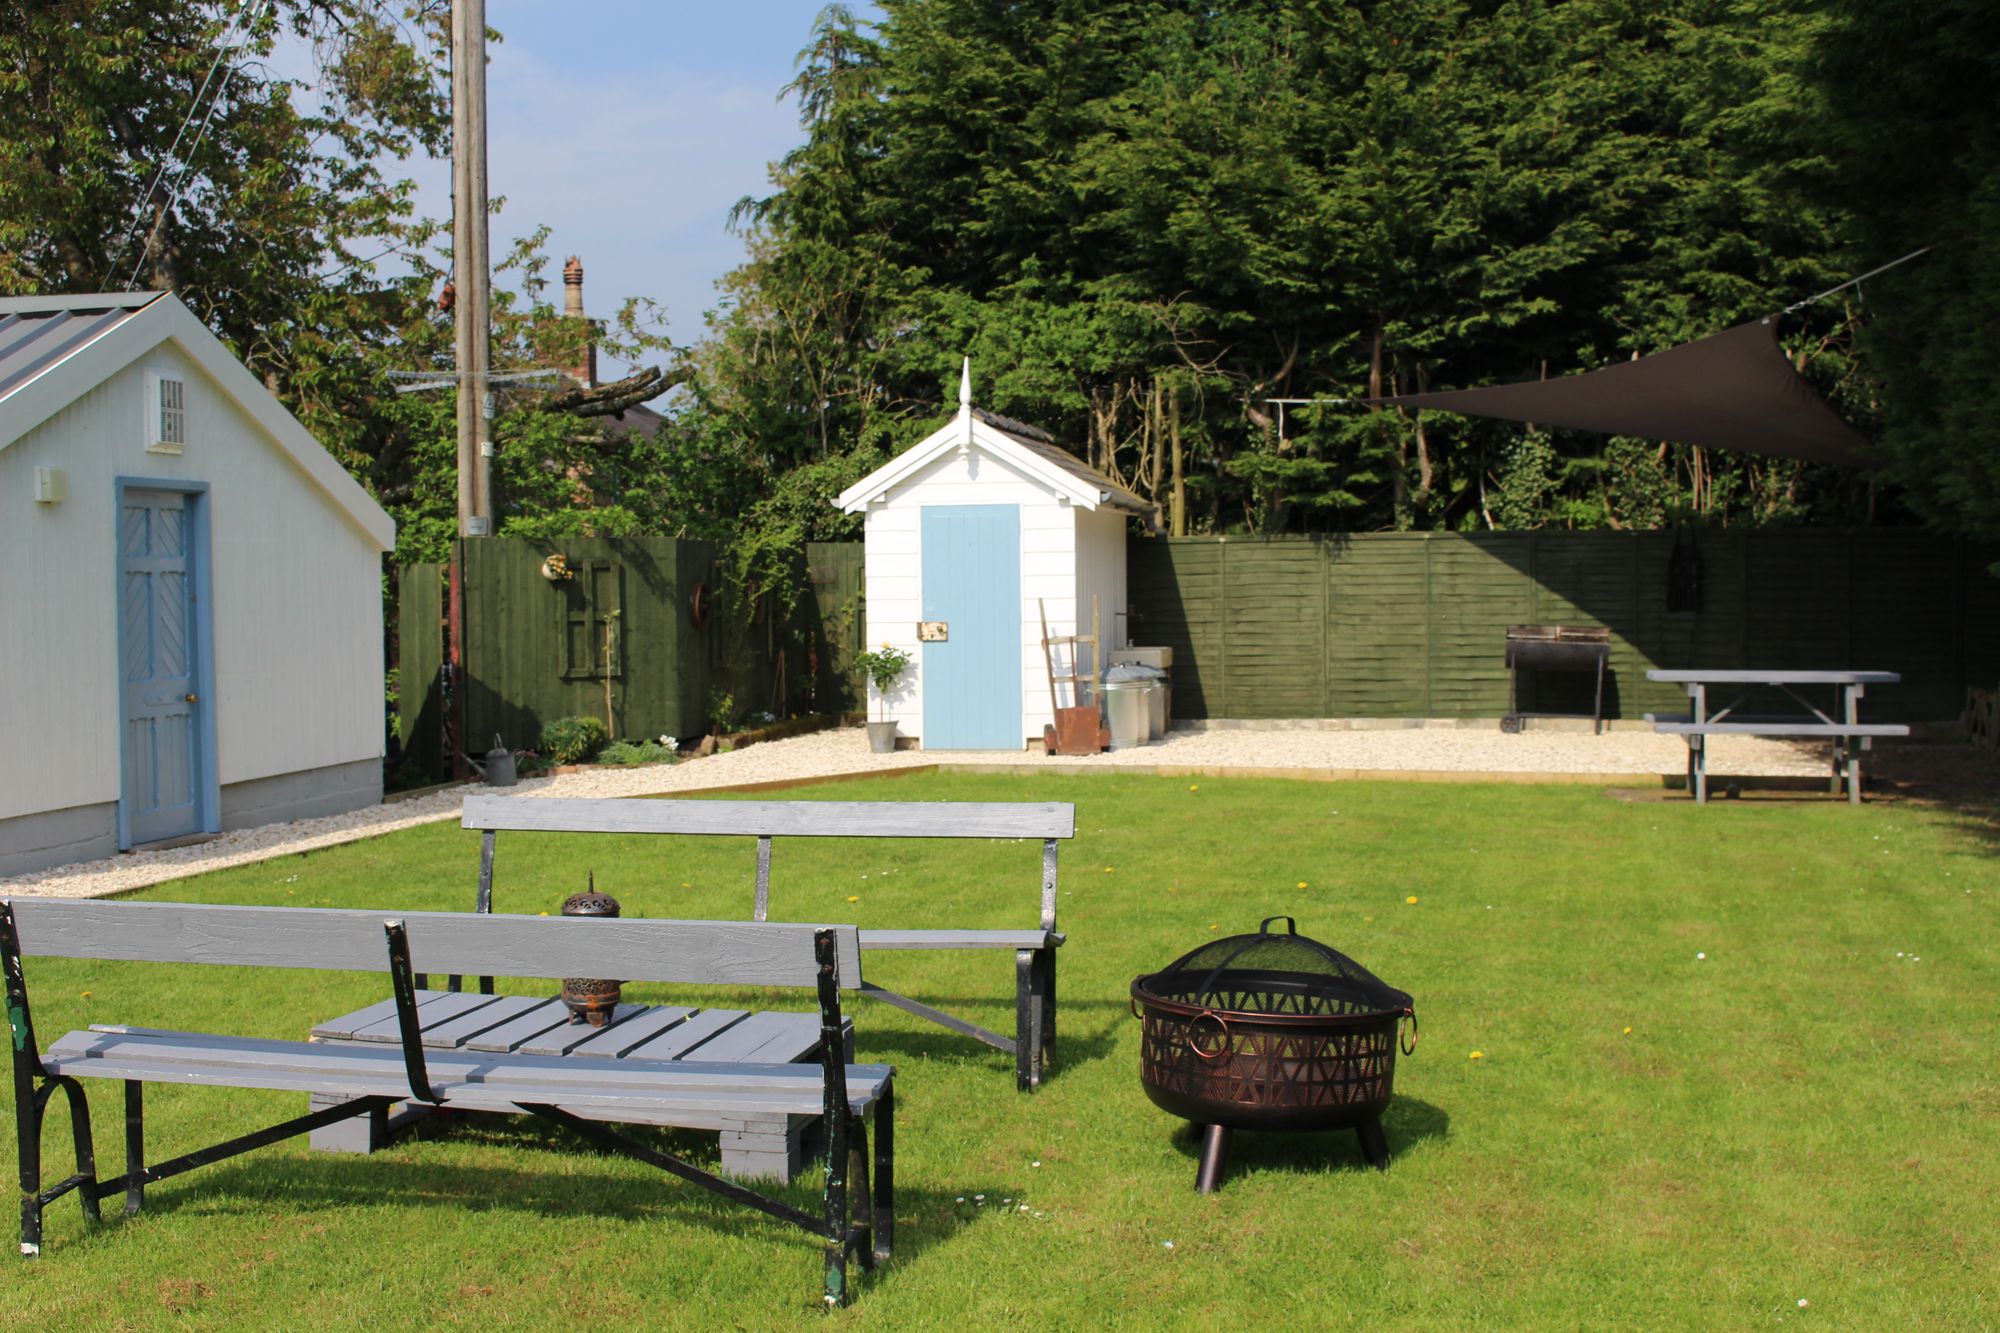 Self-Catering in North Yorkshire holidays at Cool Places